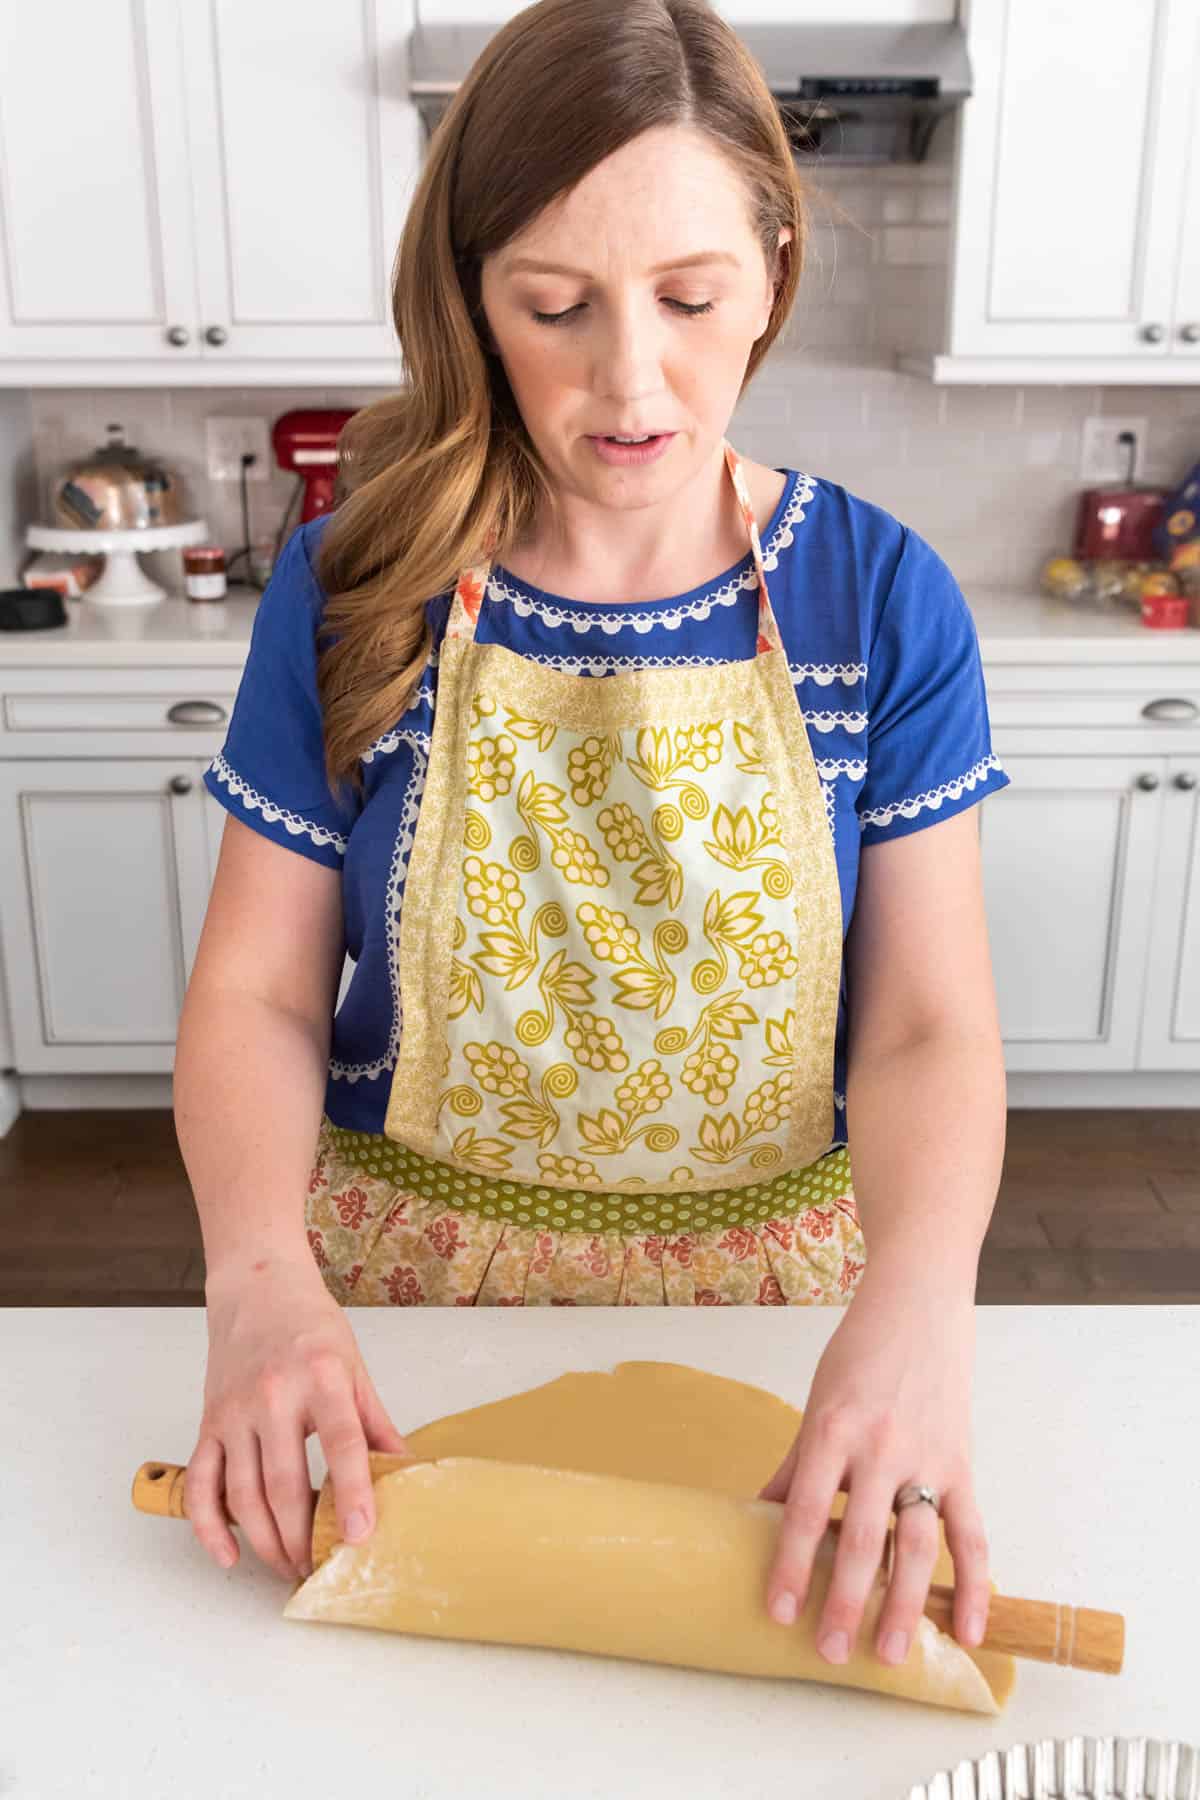 An image of a woman rolling out a sweet pastry crust for a French fruit tart.